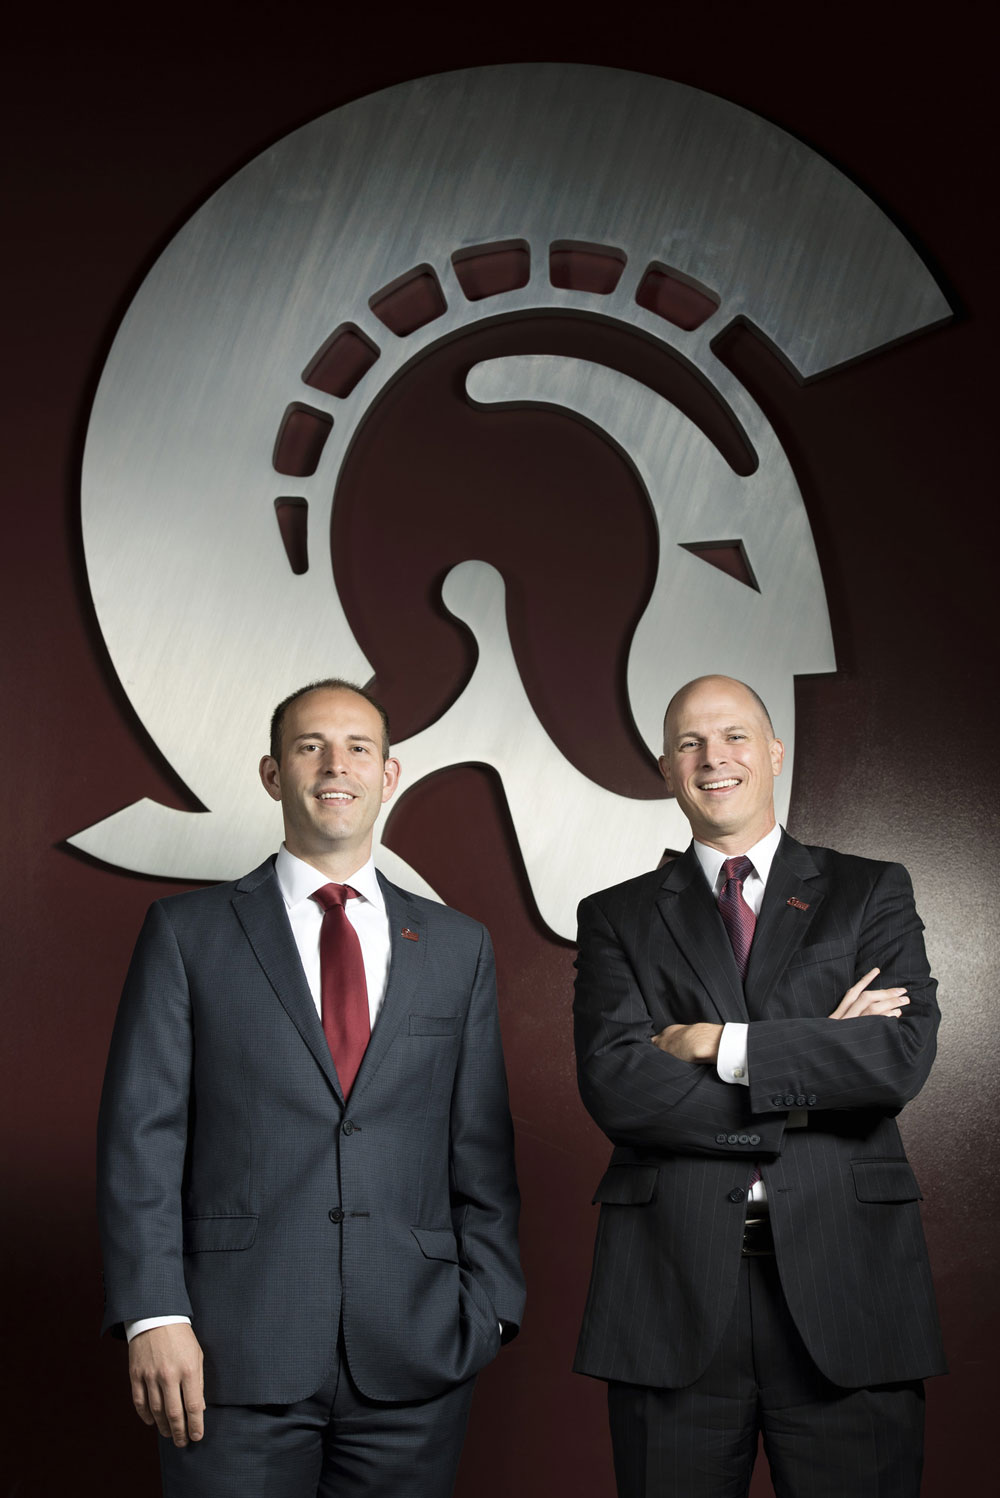 UALR's Chasse Conque and Christian O'Neal pose in front of a large Trojan logo